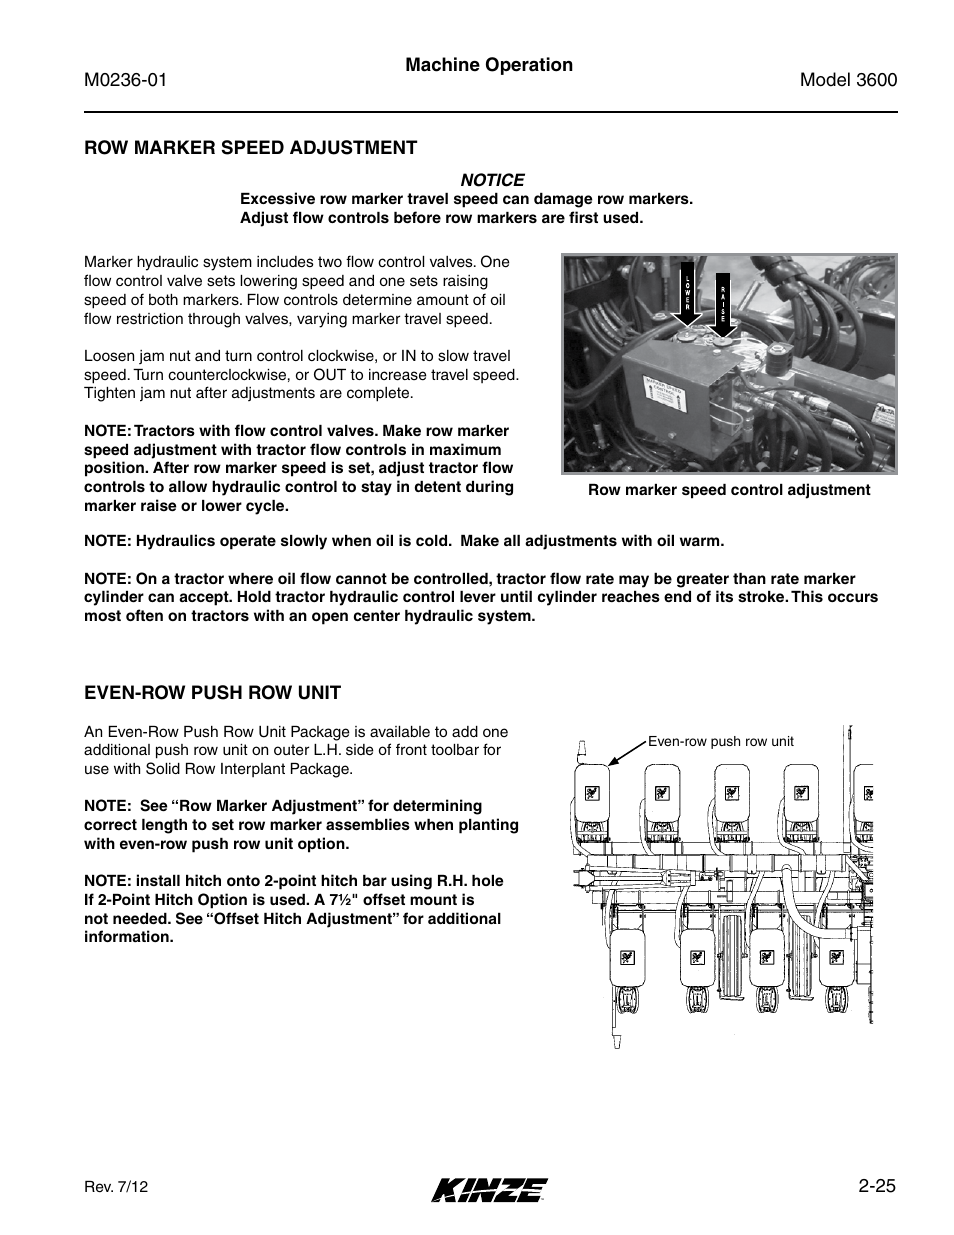 Row marker speed adjustment, Even-row push row unit, Row marker speed adjustment -25 | Even-row push row unit -25 | Kinze 3600 Lift and Rotate Planter Rev. 7/14 User Manual | Page 35 / 172